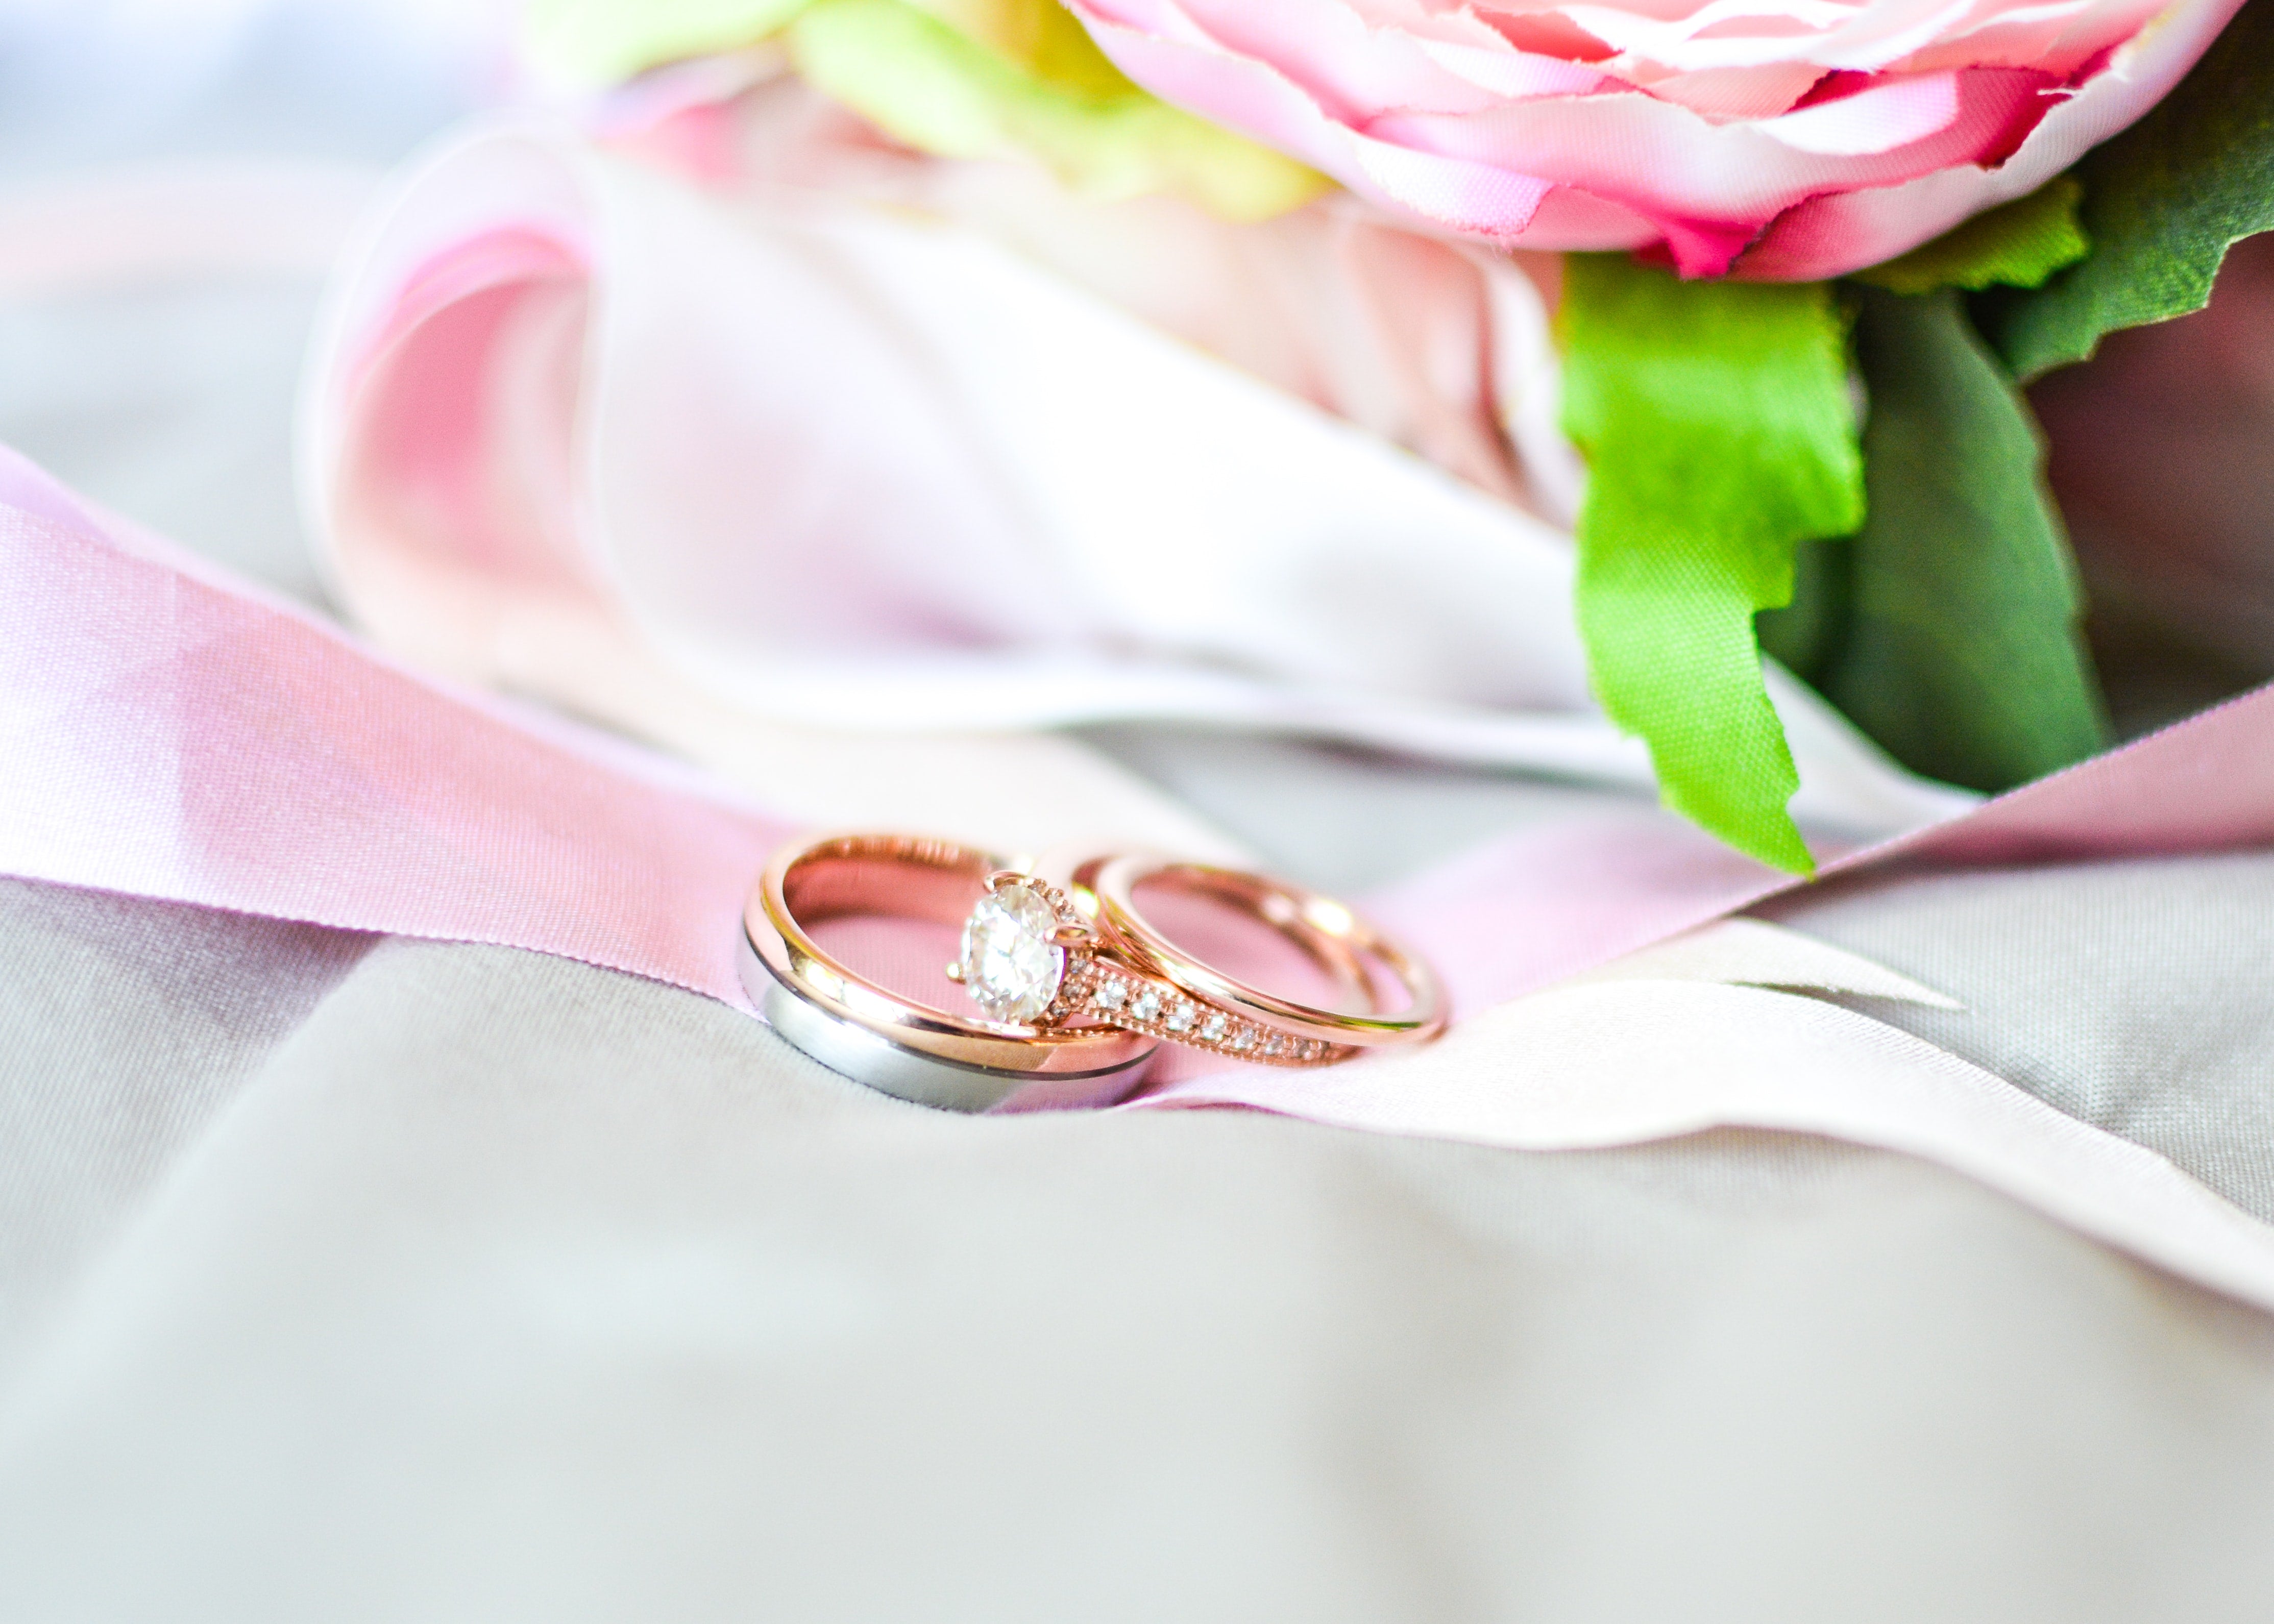 creative photo of rose gold wedding rings of bride and groom